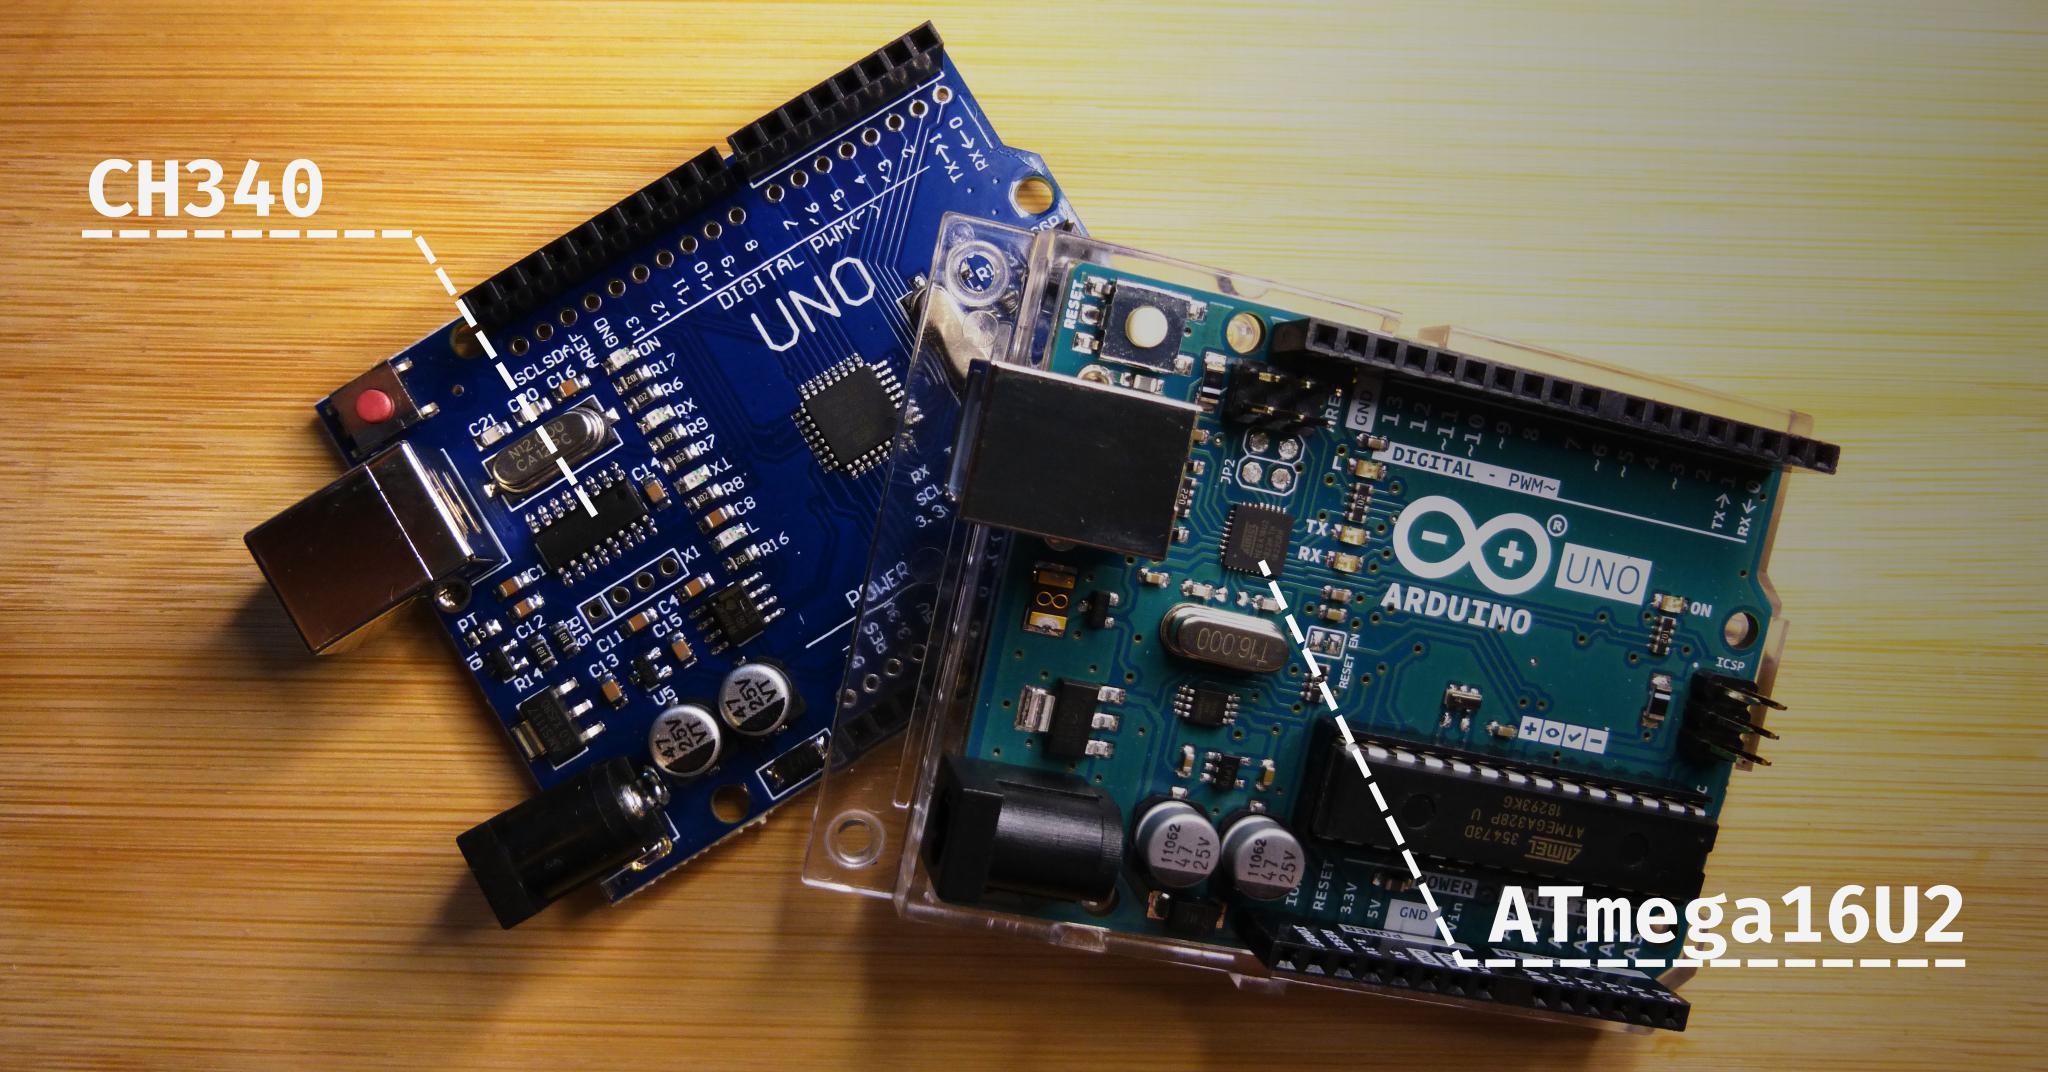 Arduino boards with USB-to-Serial converters